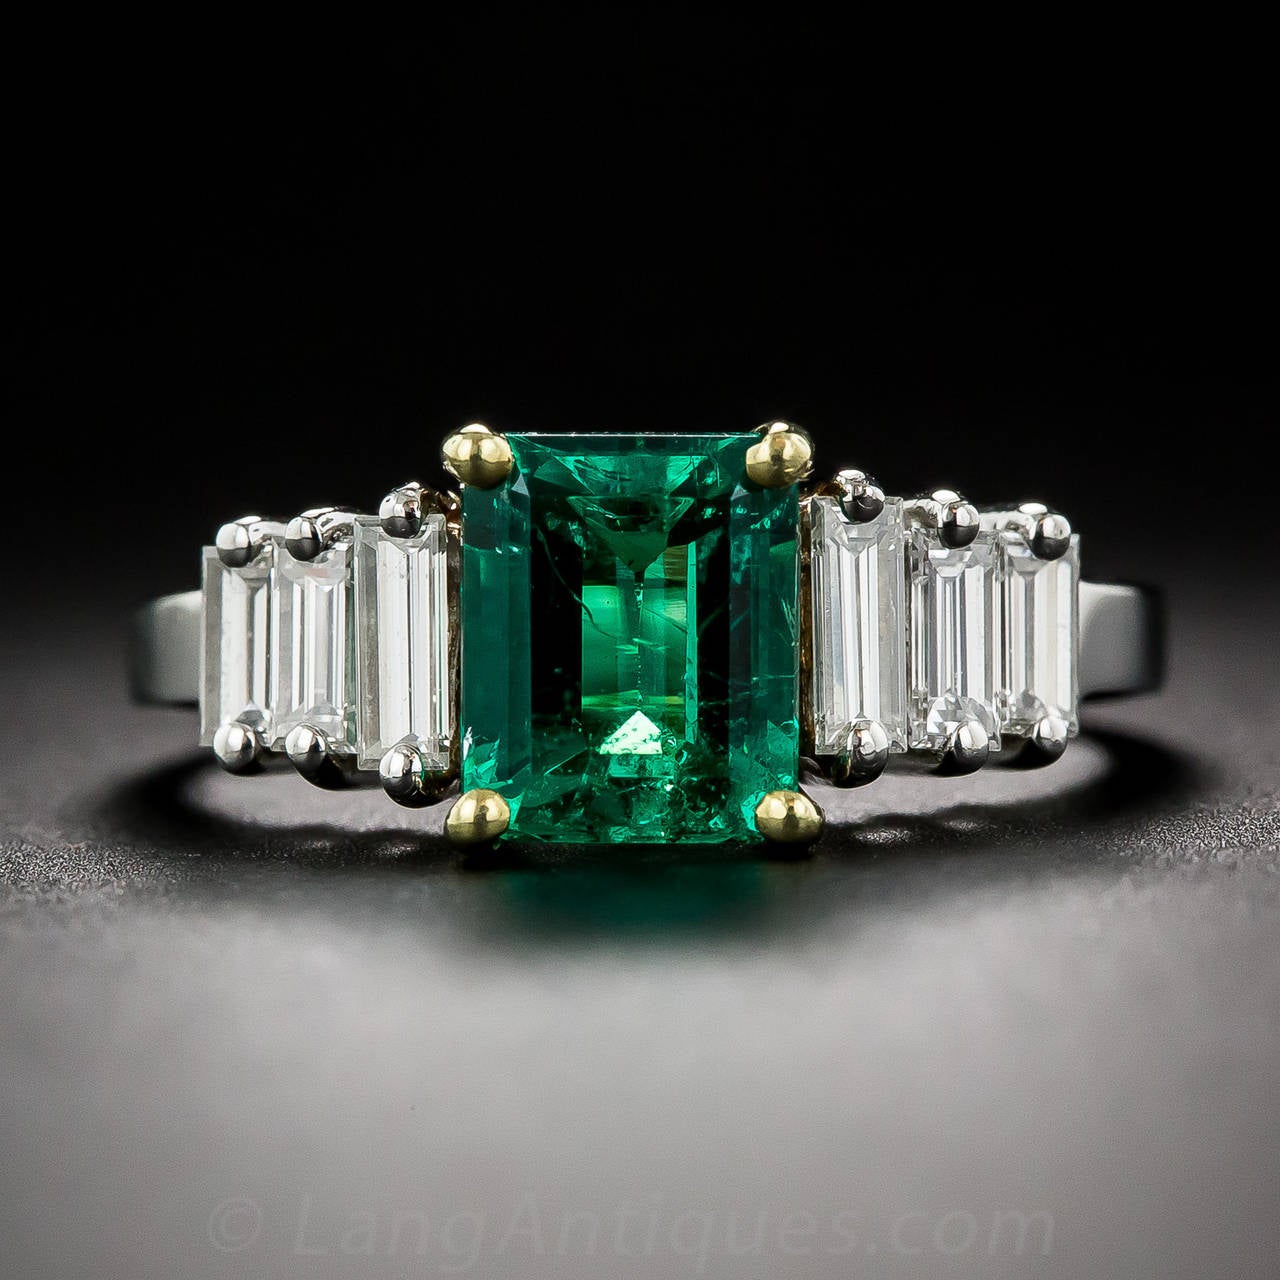 Bright icy-white diamond baguette steps lead up to a luscious, richly saturated, crystalline emerald, weighing 1.50 carats, with a vibrant green color that would be difficult to improve upon. The 'gemmy' gemstone is set in 18K yellow gold and the